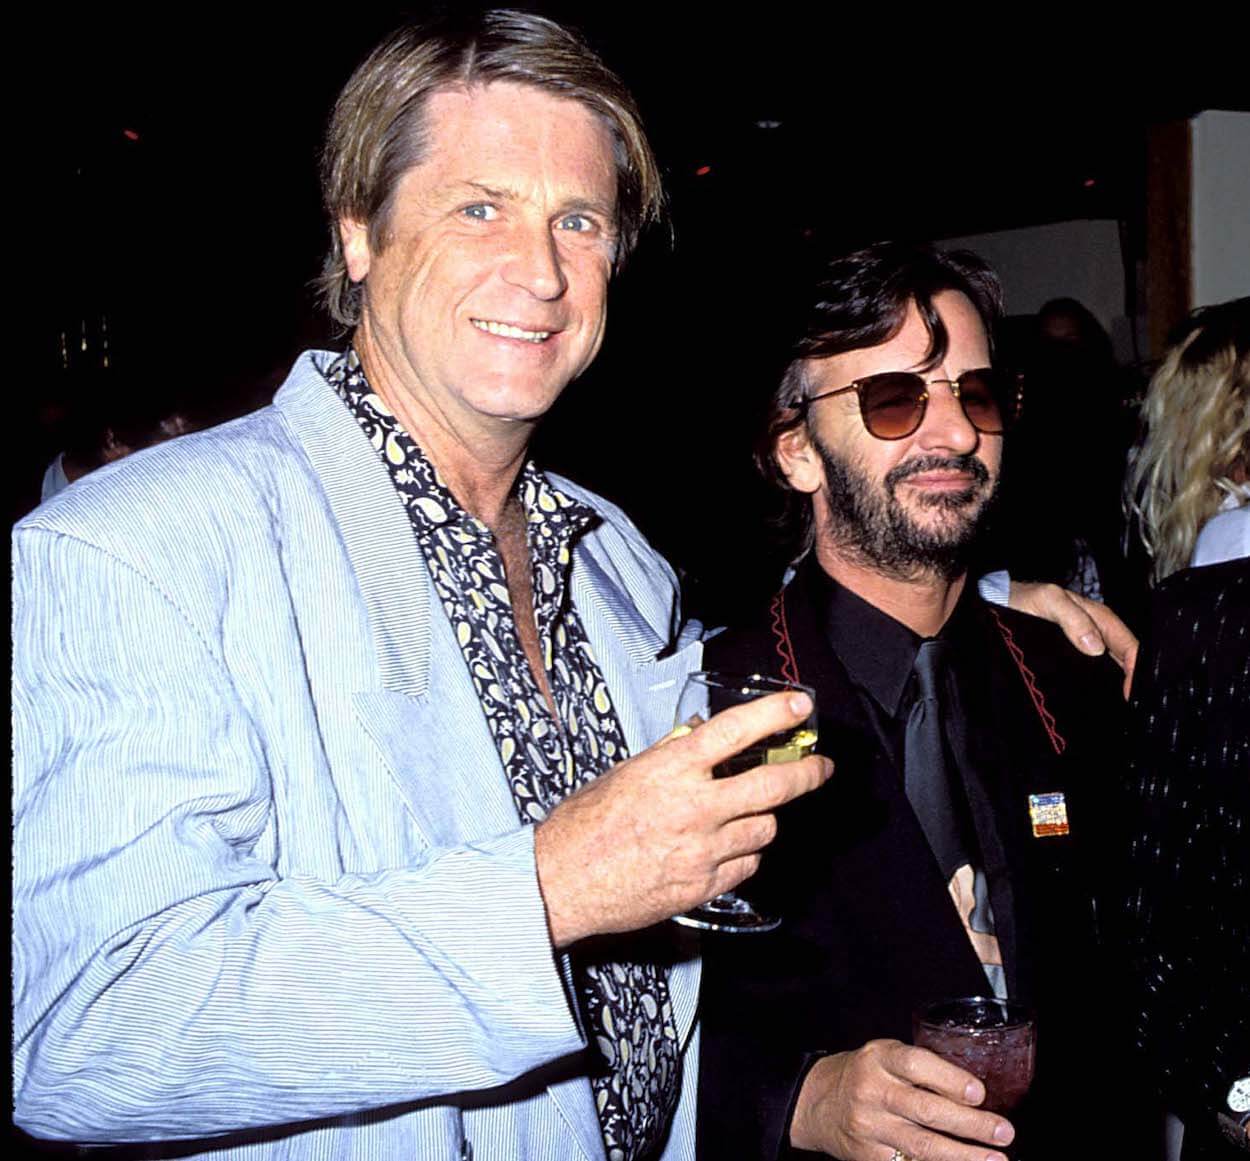 Brian Wilson (left) places his left arm around Ringo Starr during a 1990 party.